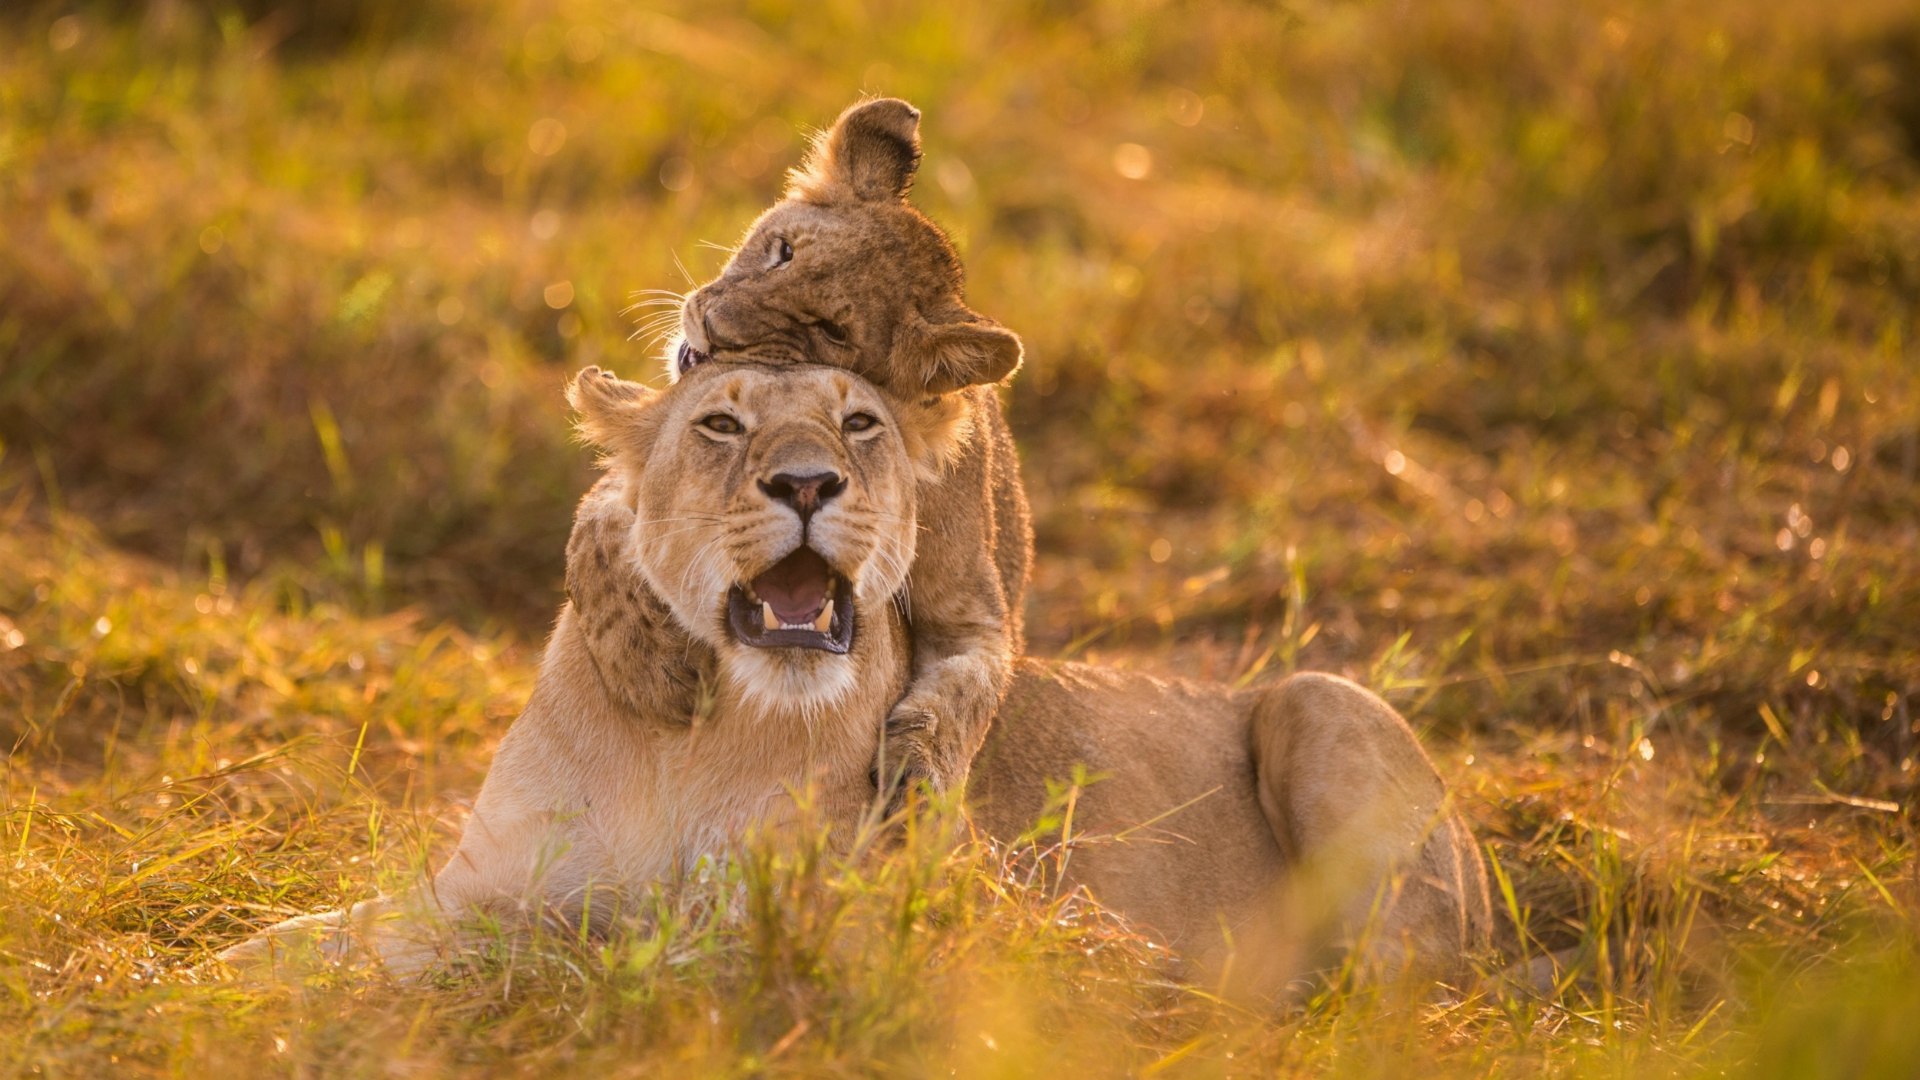 Lion Cub Riding On Mum Wallpaper And Image